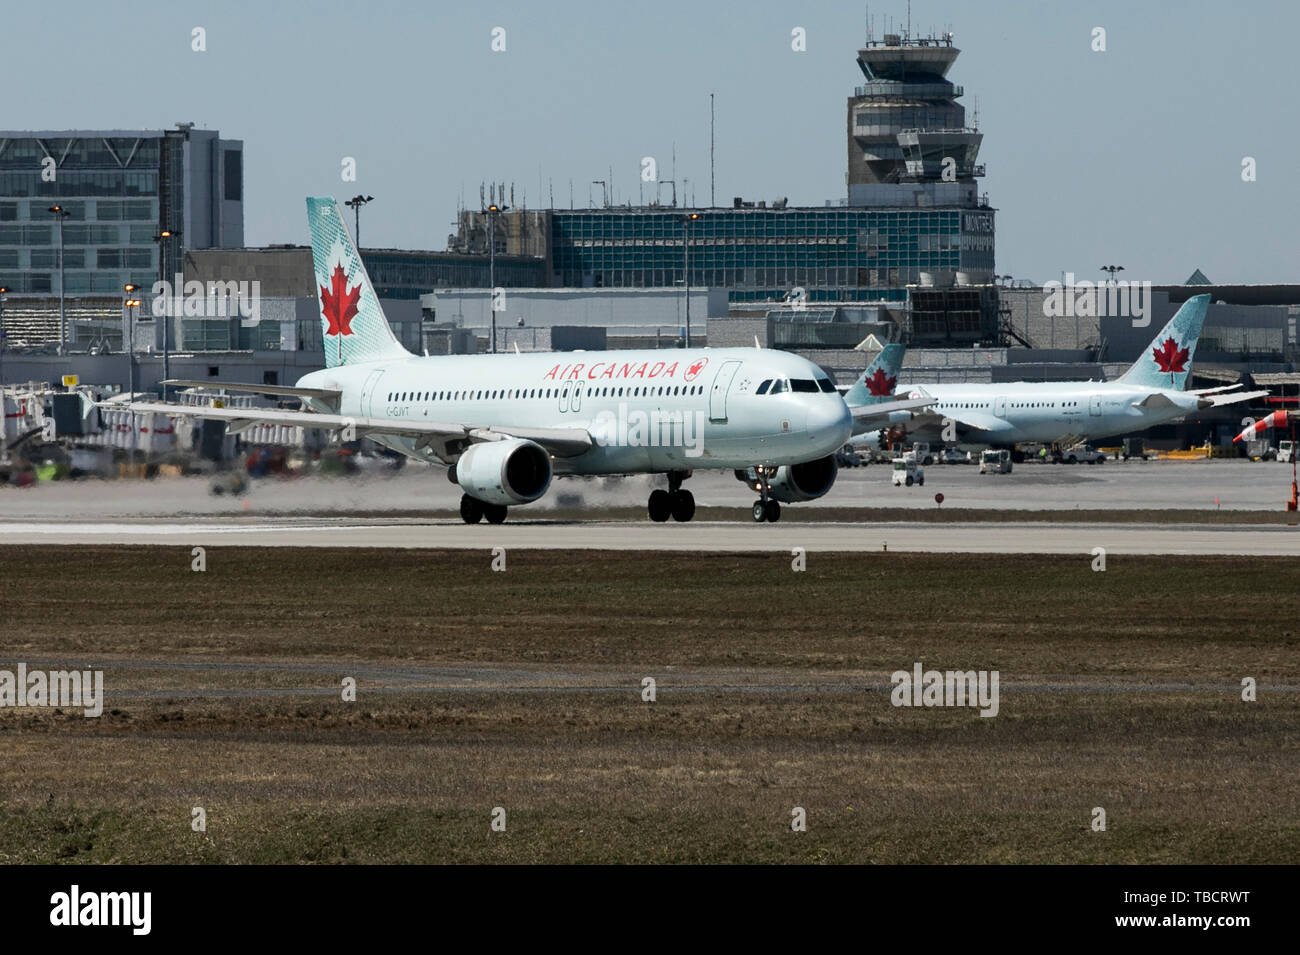 A Air Canada Airbus A320 airplane is seen departing Montréal-Pierre Elliott Trudeau International Airport in Montreal, Quebec, Canada, on April 22, 20 Stock Photo